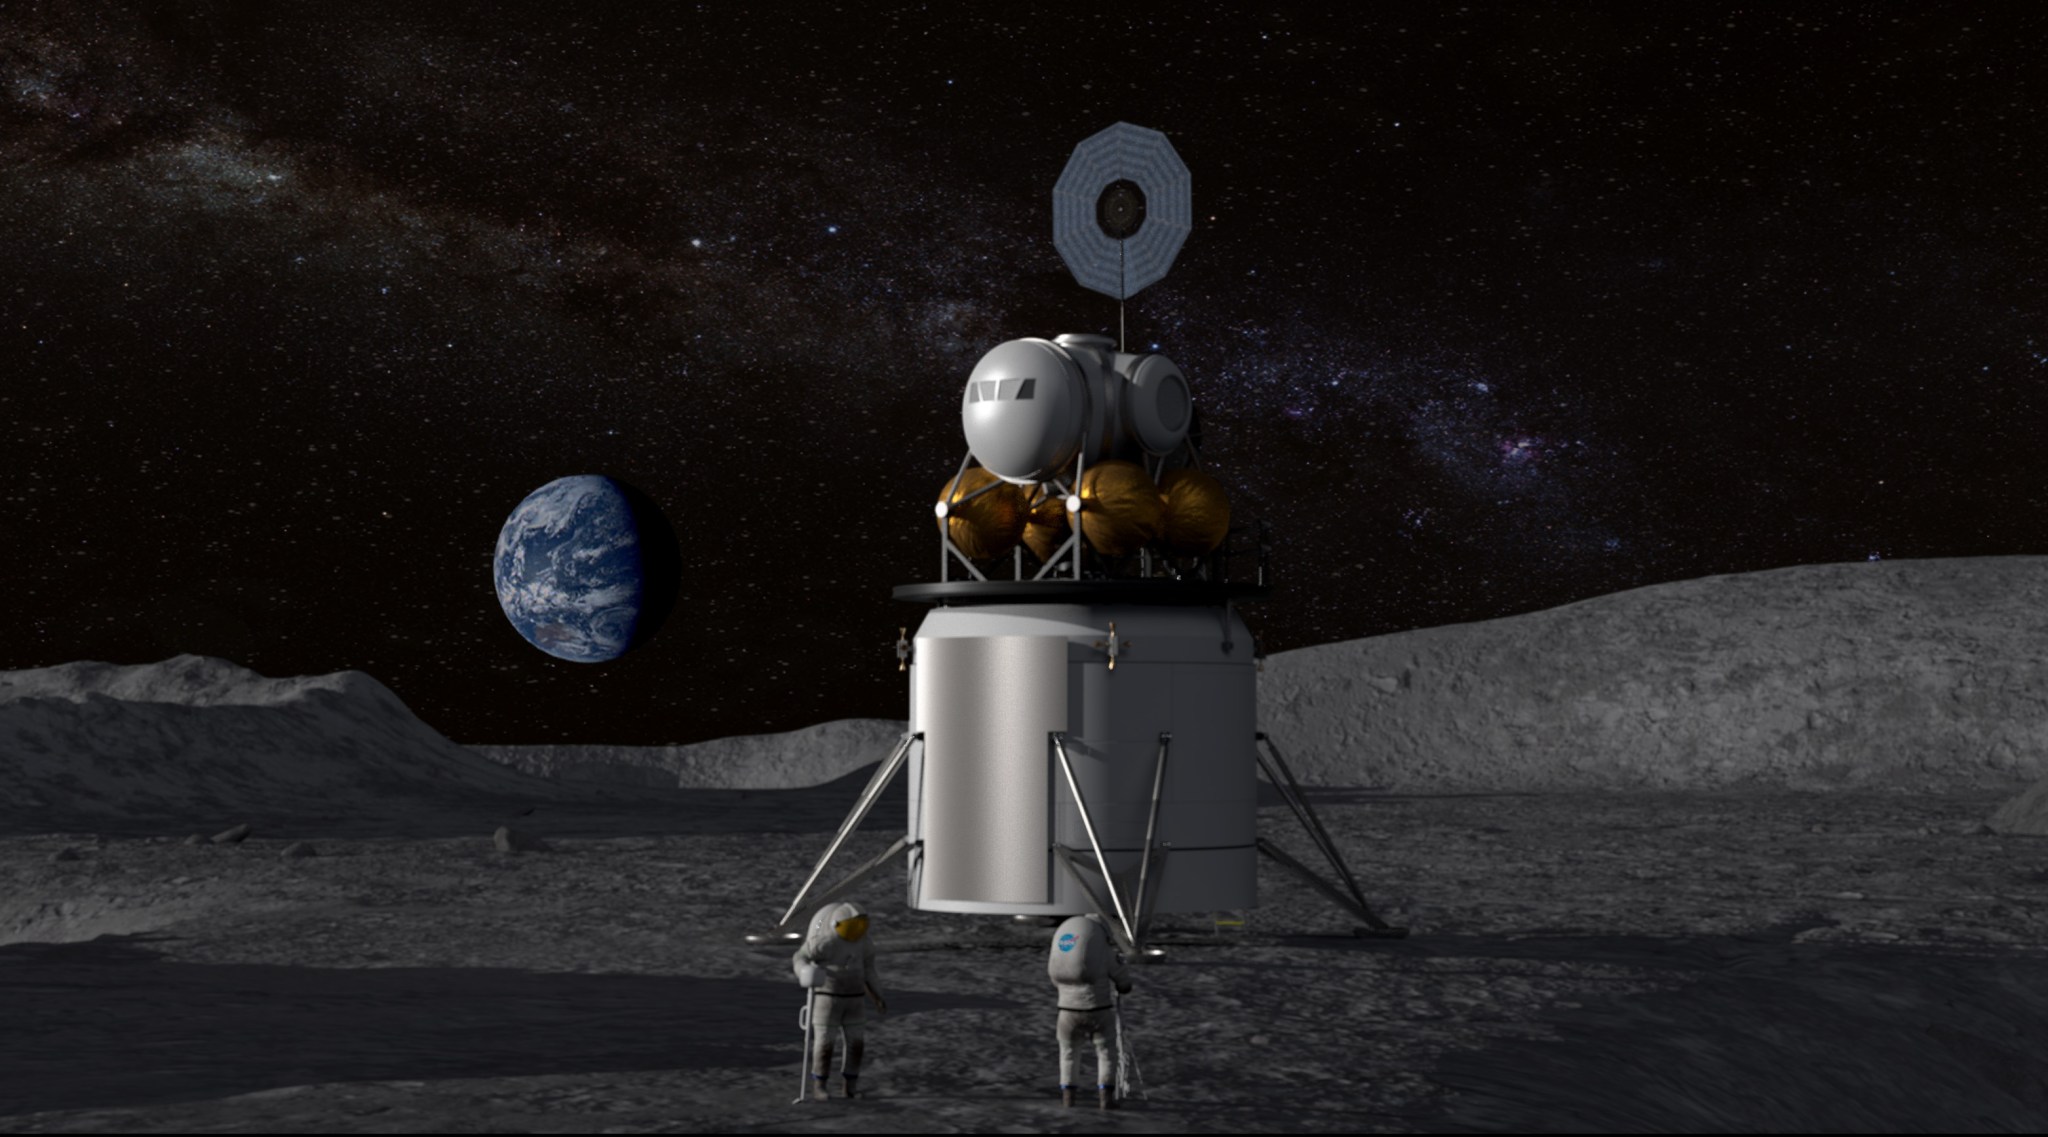 Illustration of a human landing system and crew on the lunar surface with Earth near the horizon.